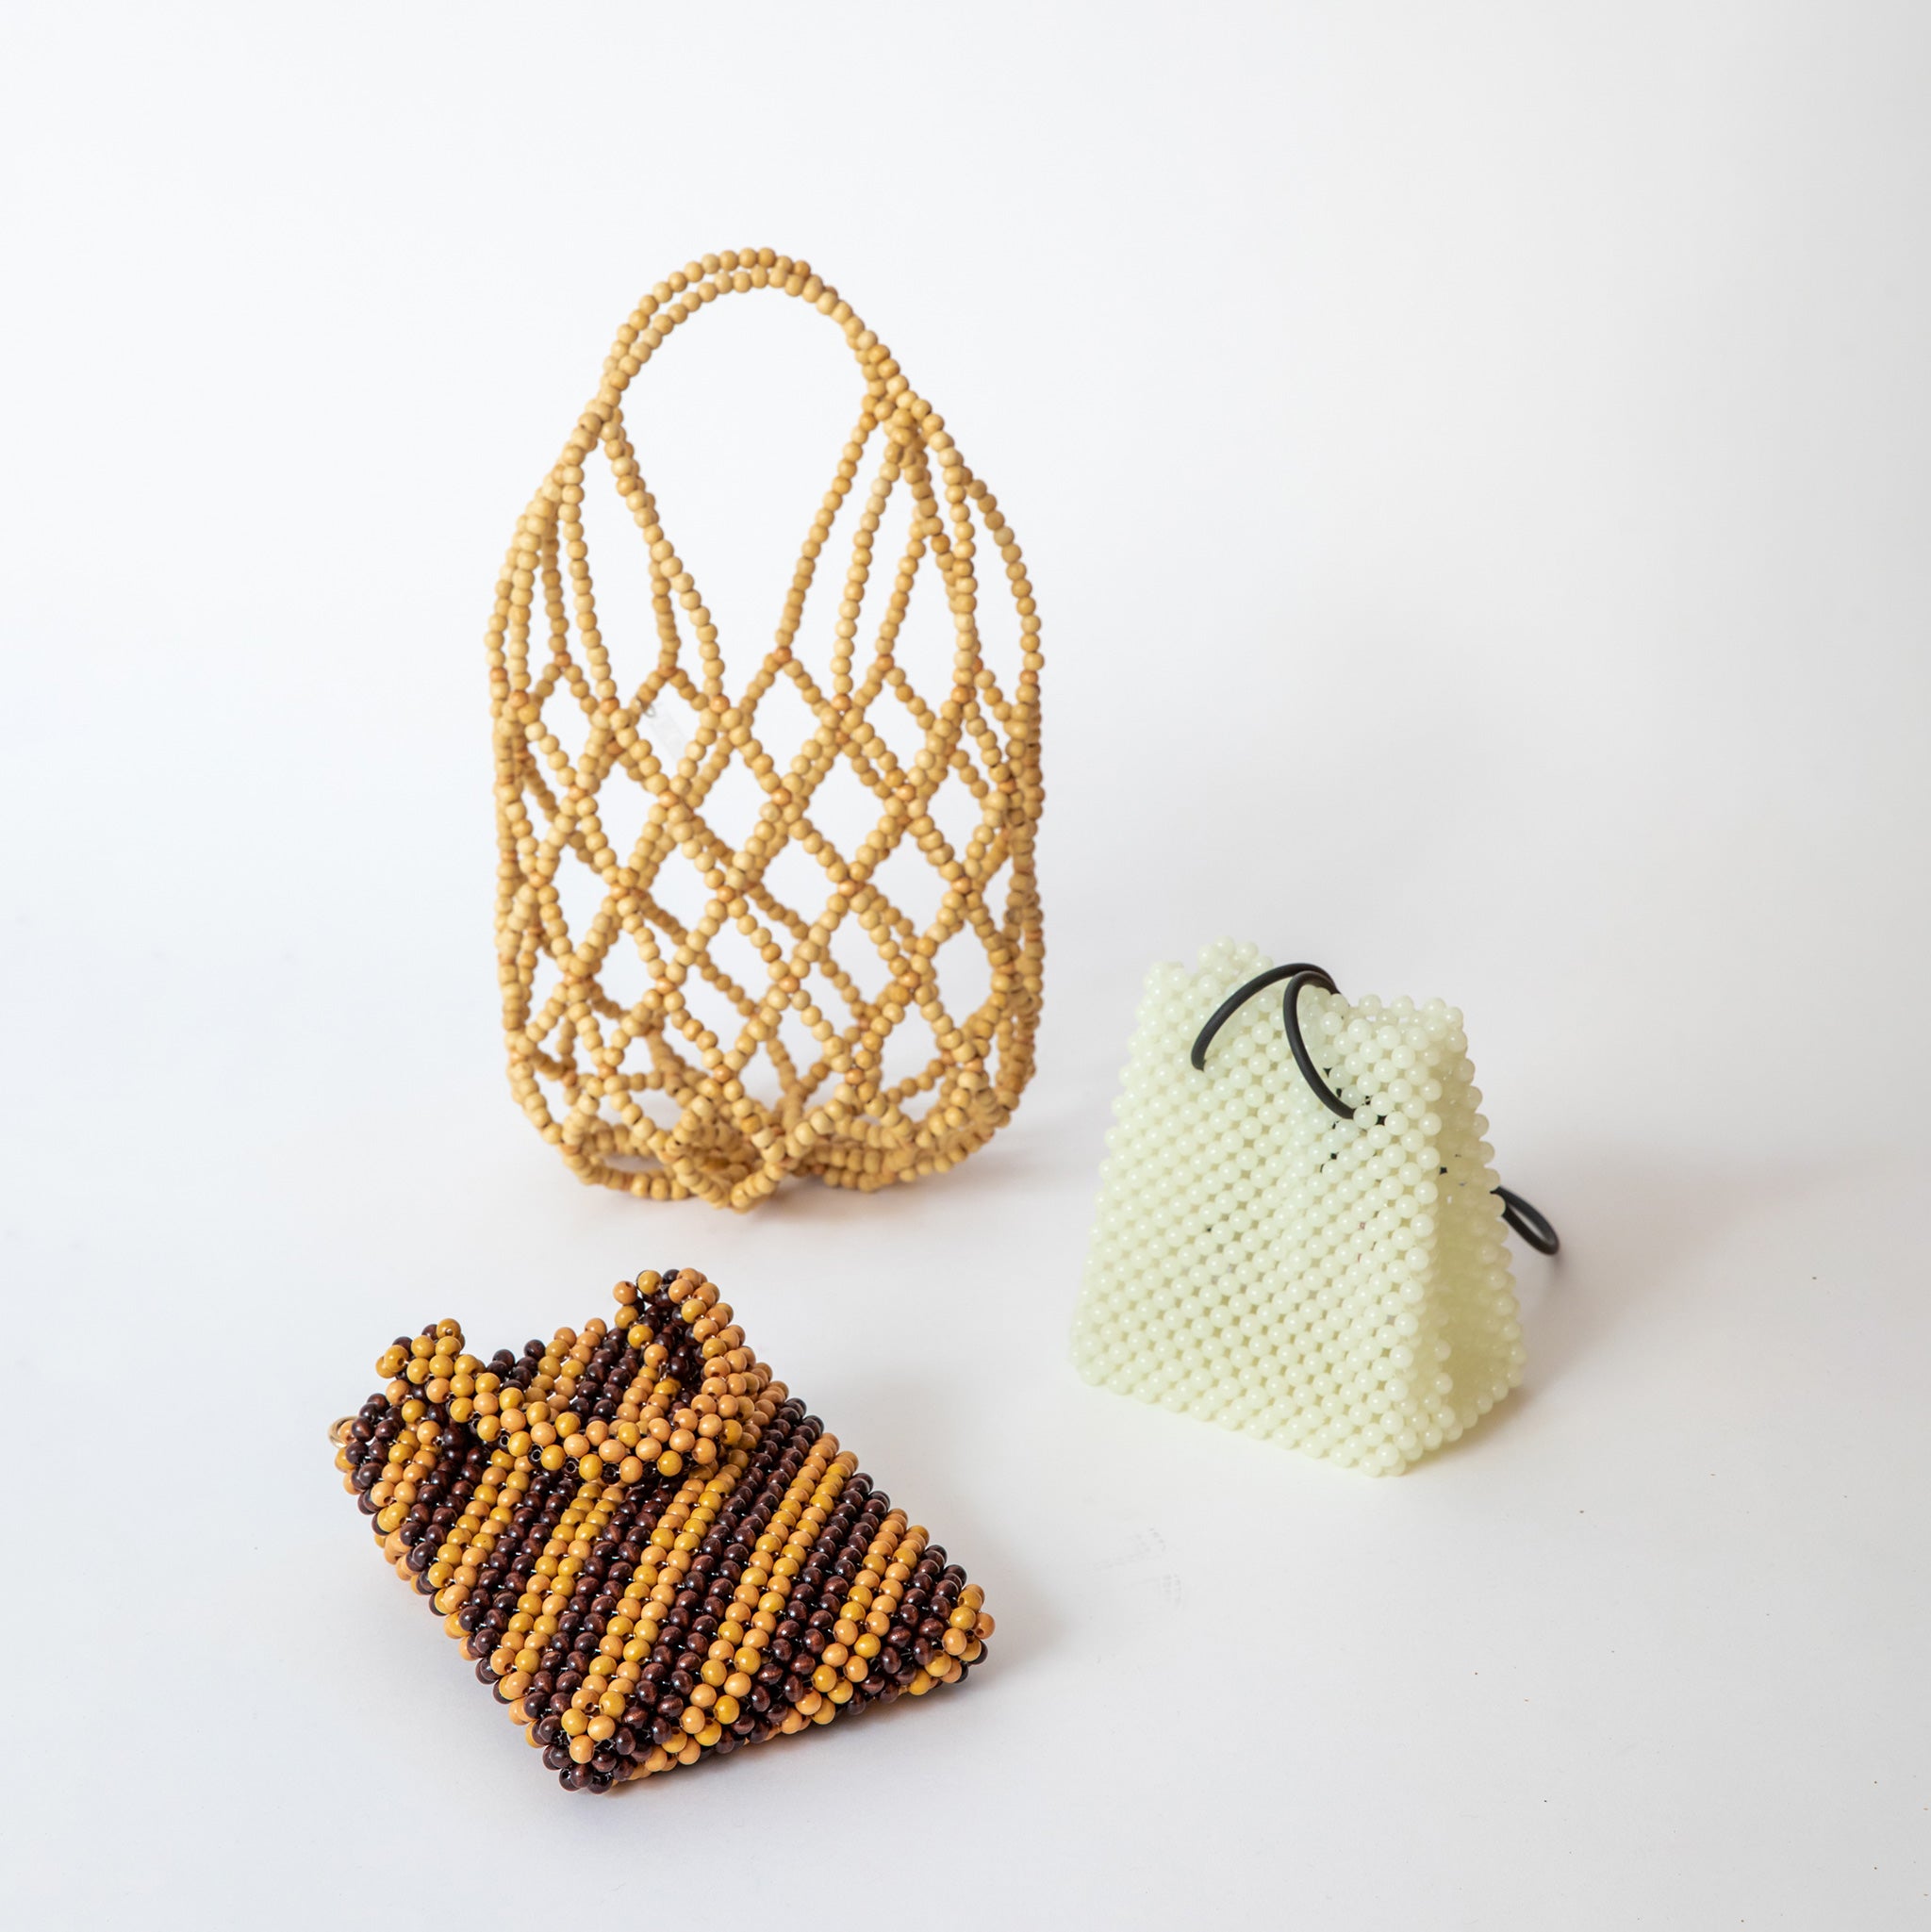 3 different Not Impressed beaded bags displayed against a white background.